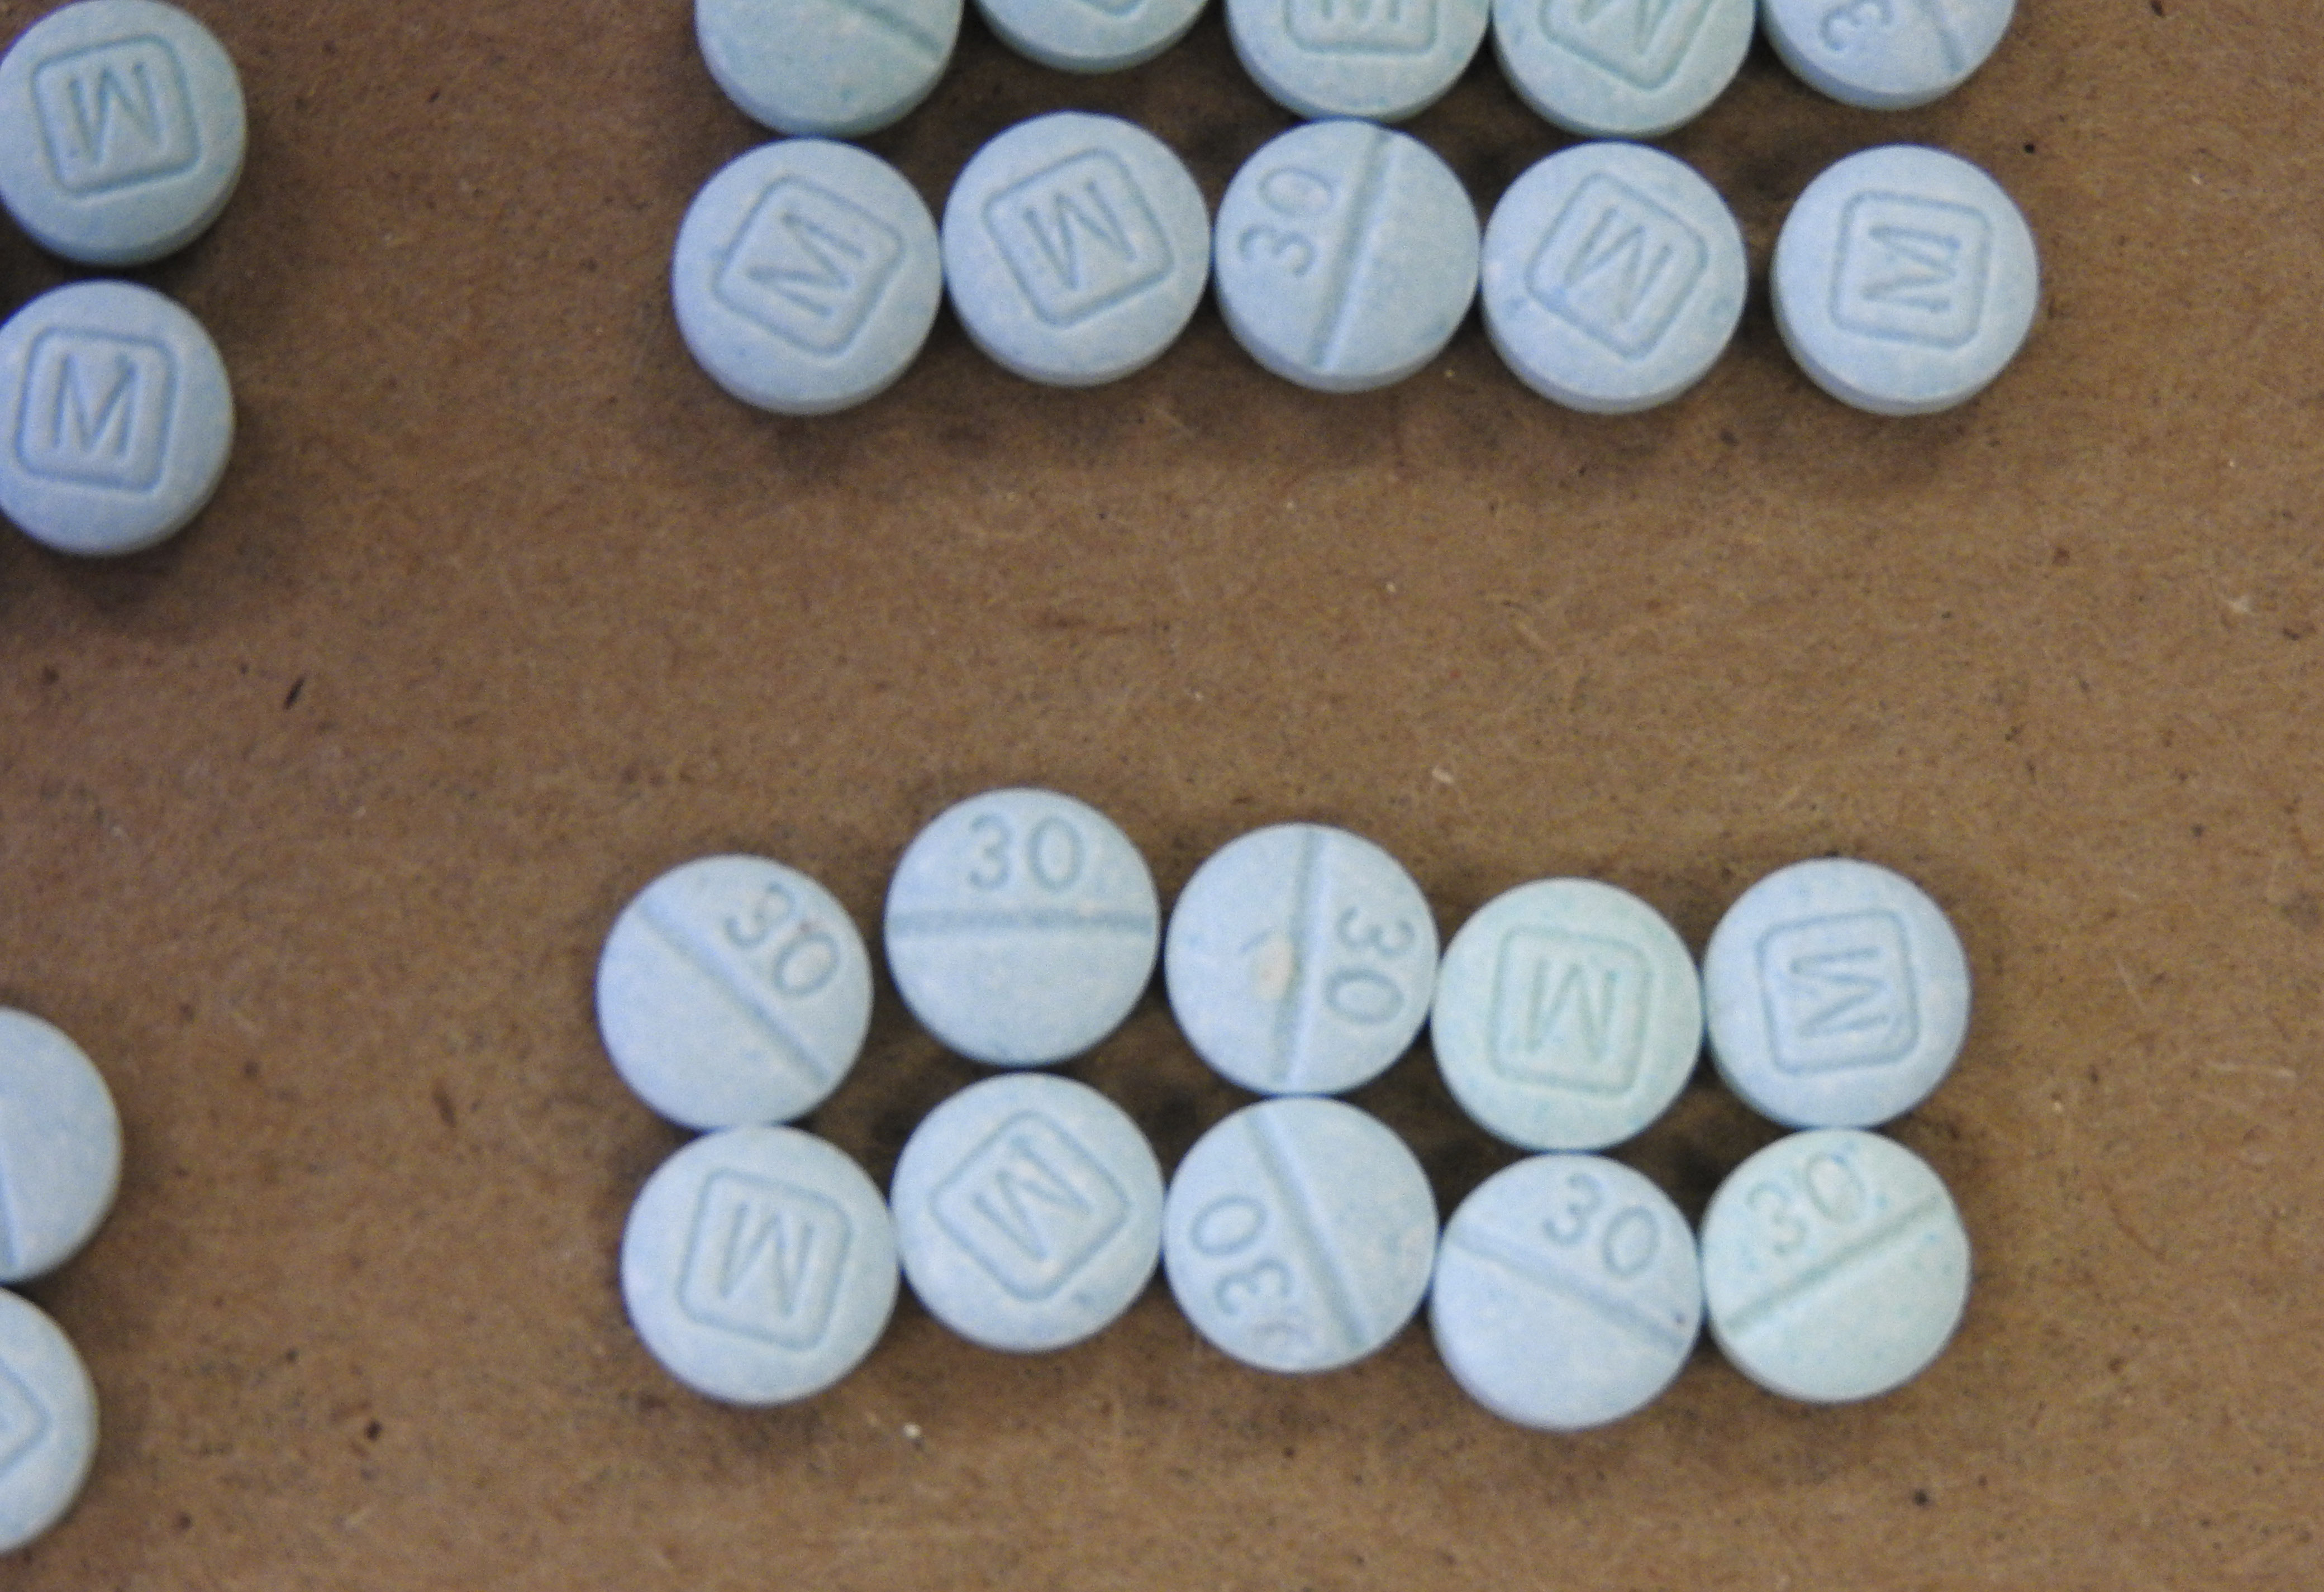 Mislabeled painkillers containing fentanyl "a fatal overdose waiting to